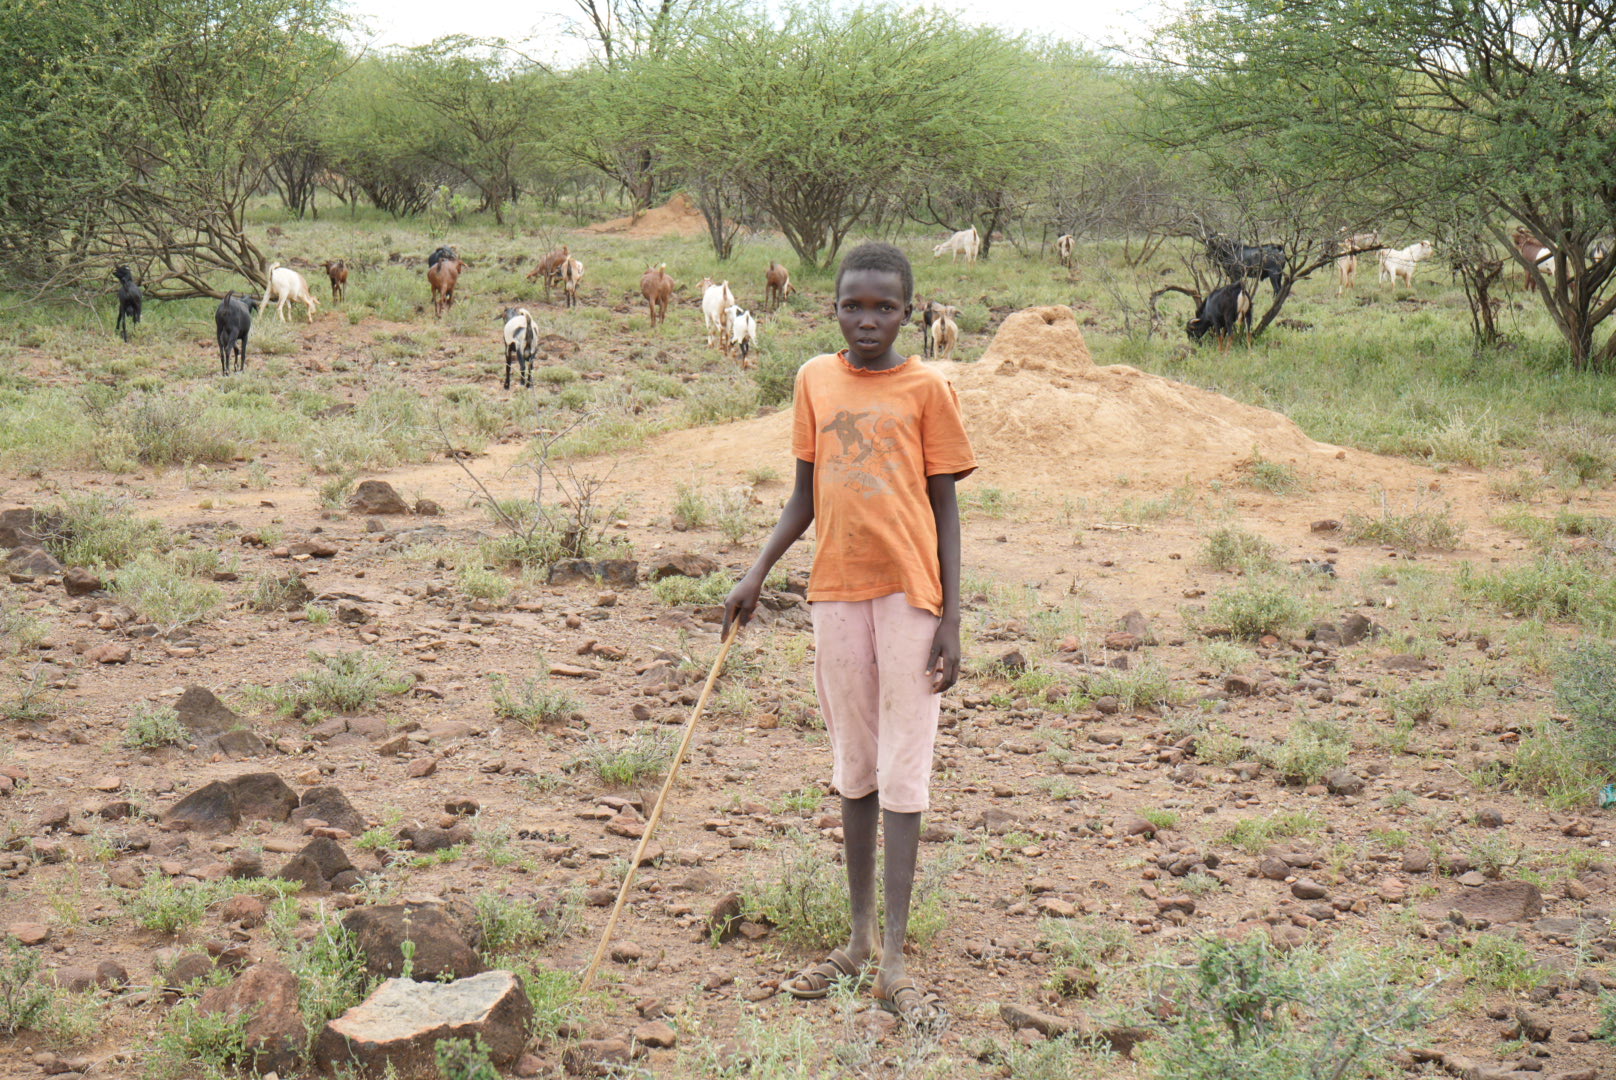 Ten-year-old Chekepus tends to his family's flock in a patch of shrubs. He misses school because he has to migrate from place to place with his family in search of pasture, a common reality in nomadic East Pokot where droughts also cut off children from education. (GSR photo/Wycliff Peter Oundo)